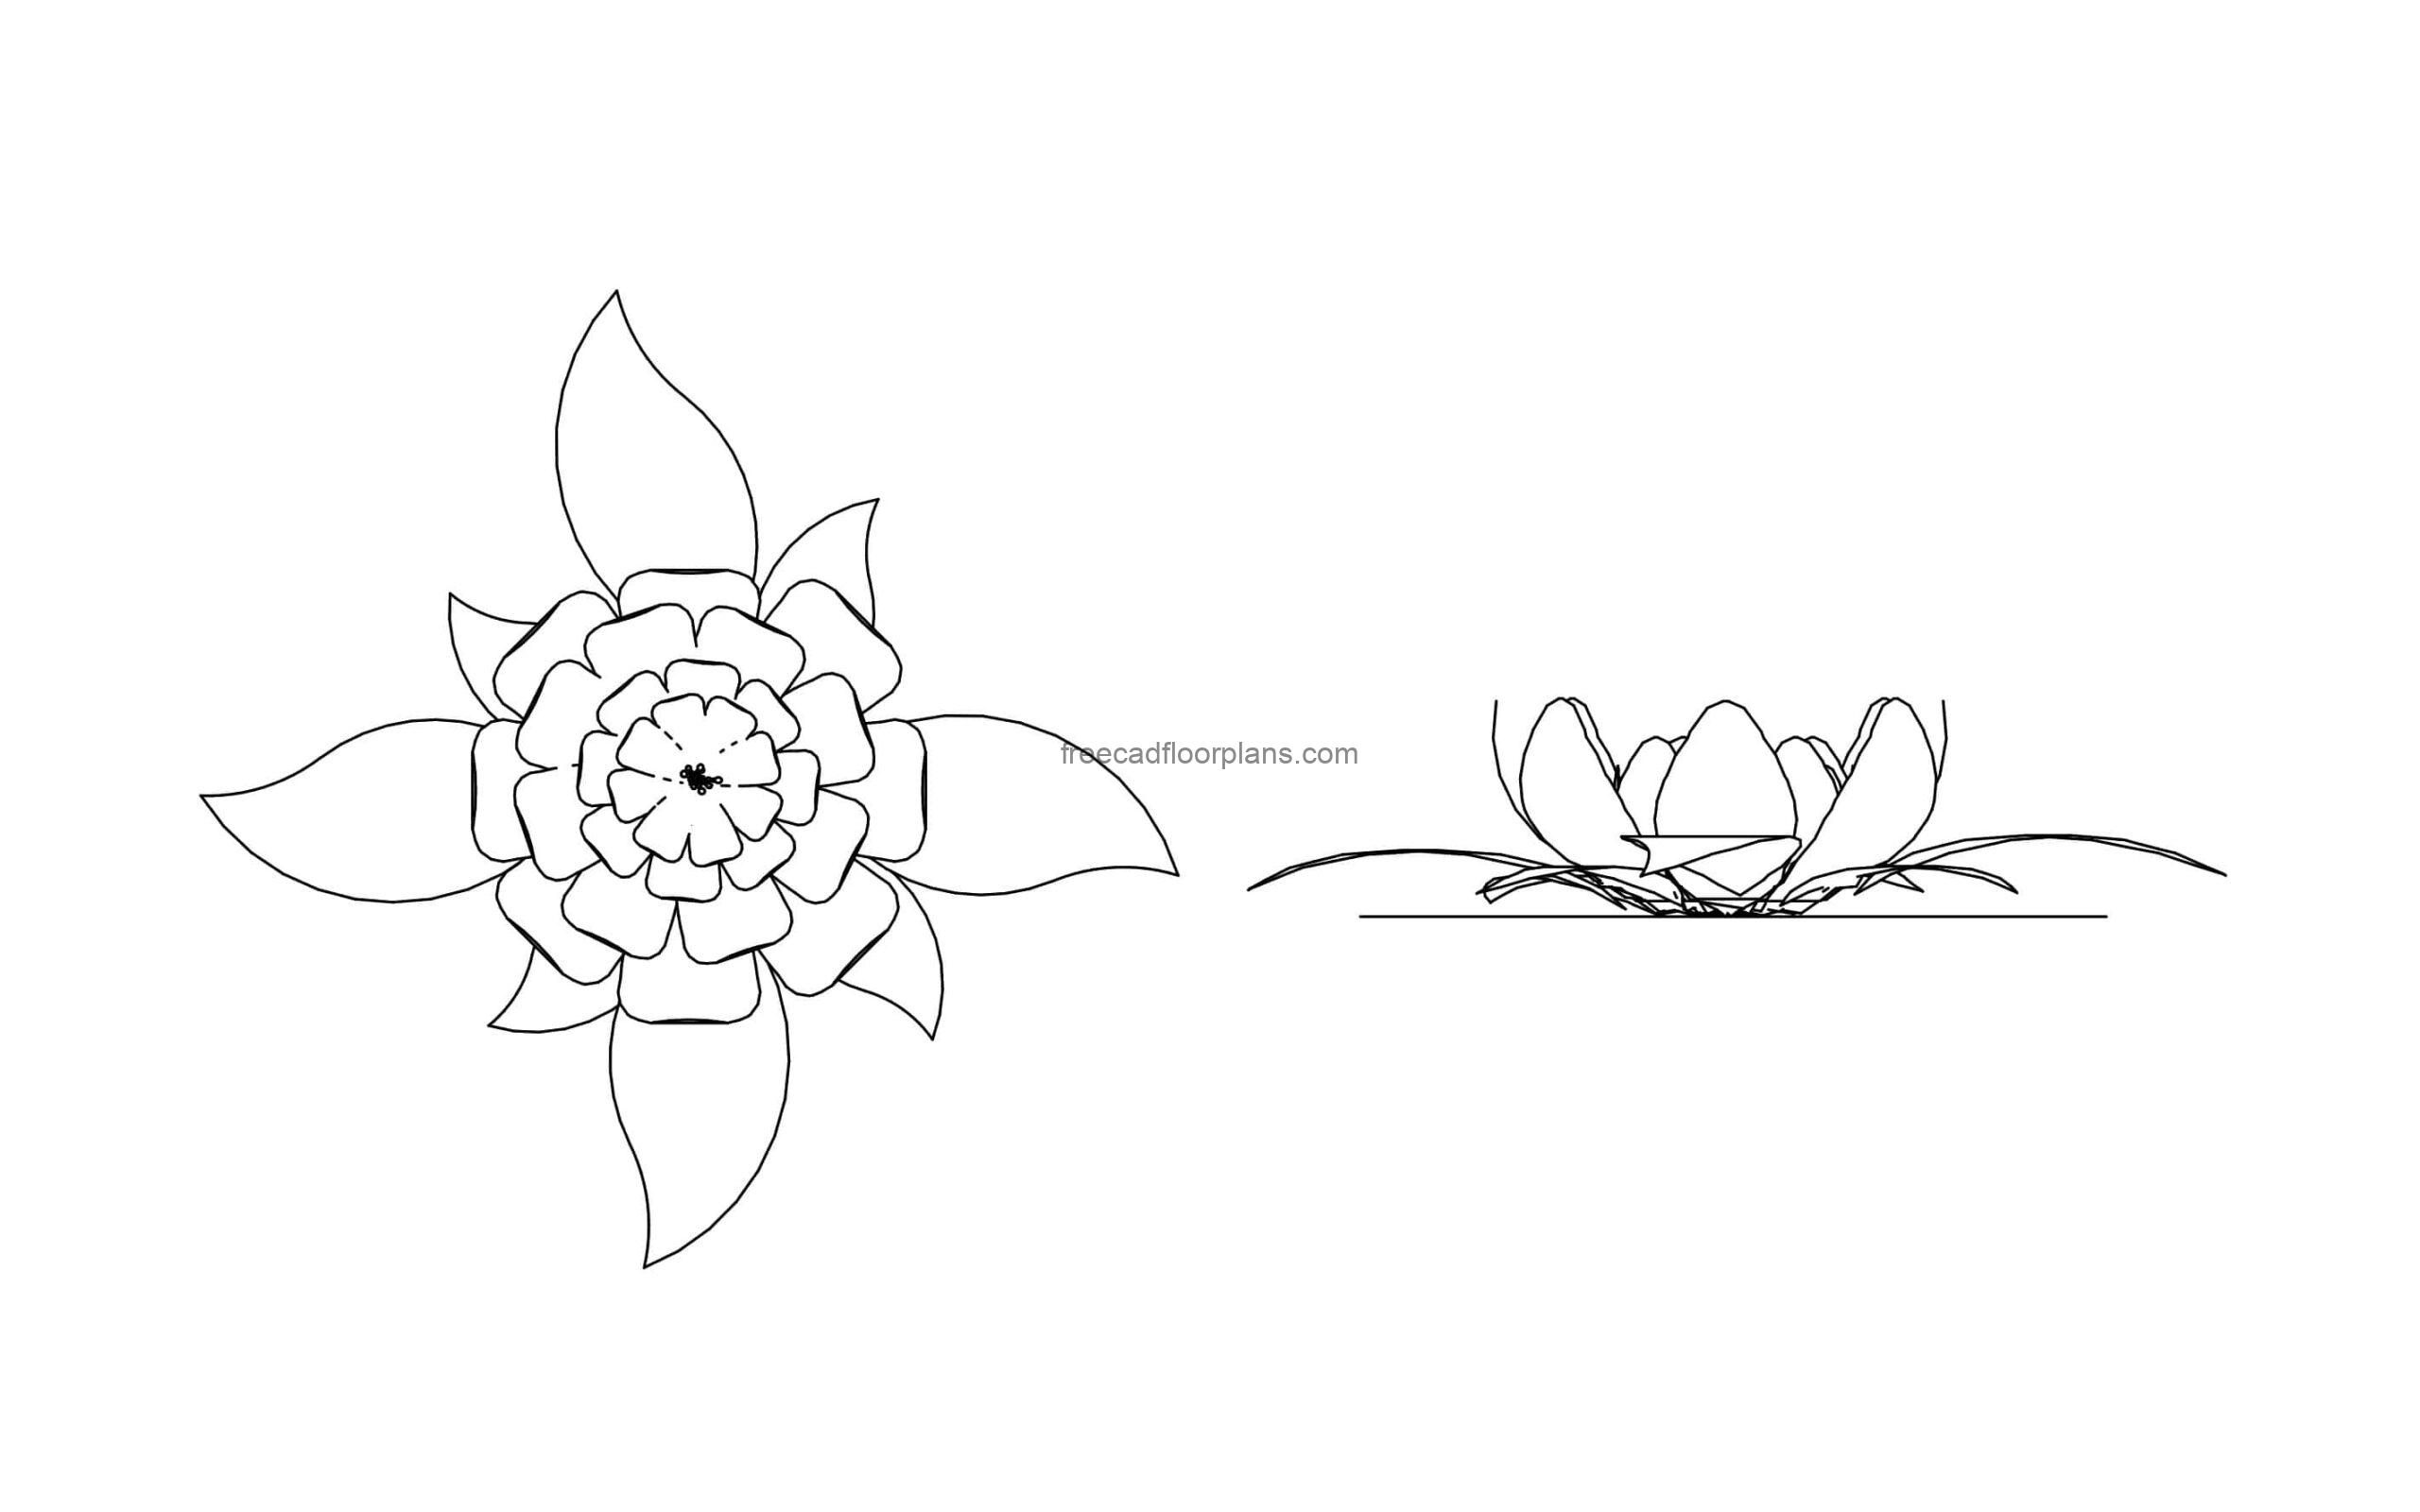 lotus flower drawing cad block plan and elevation views file in dwg format for free download